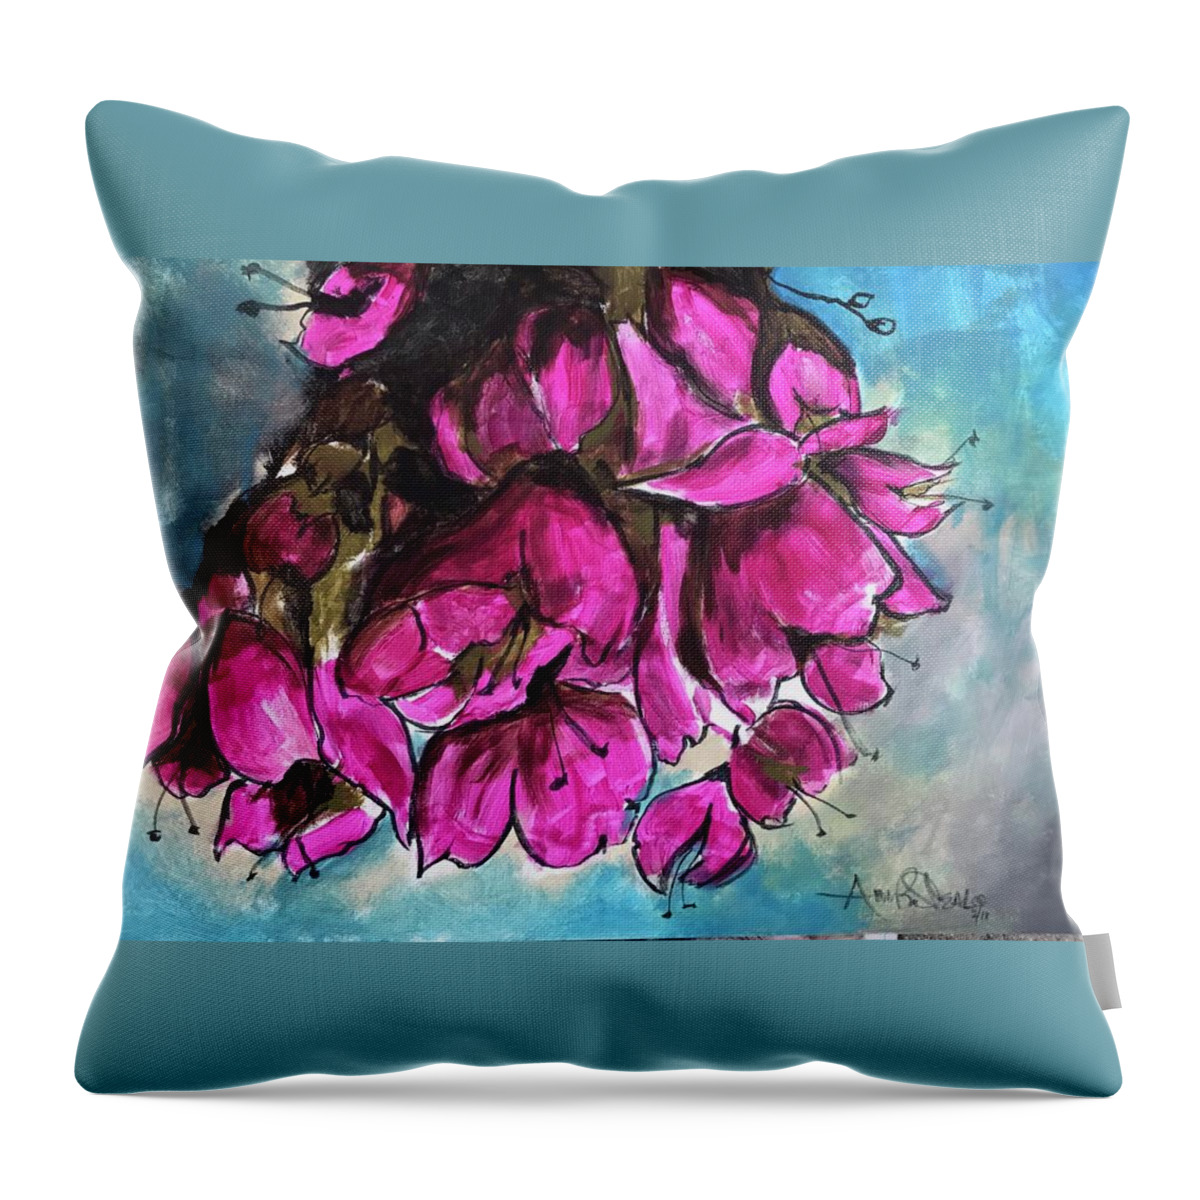  Throw Pillow featuring the painting Pink Flowers by Angie ONeal